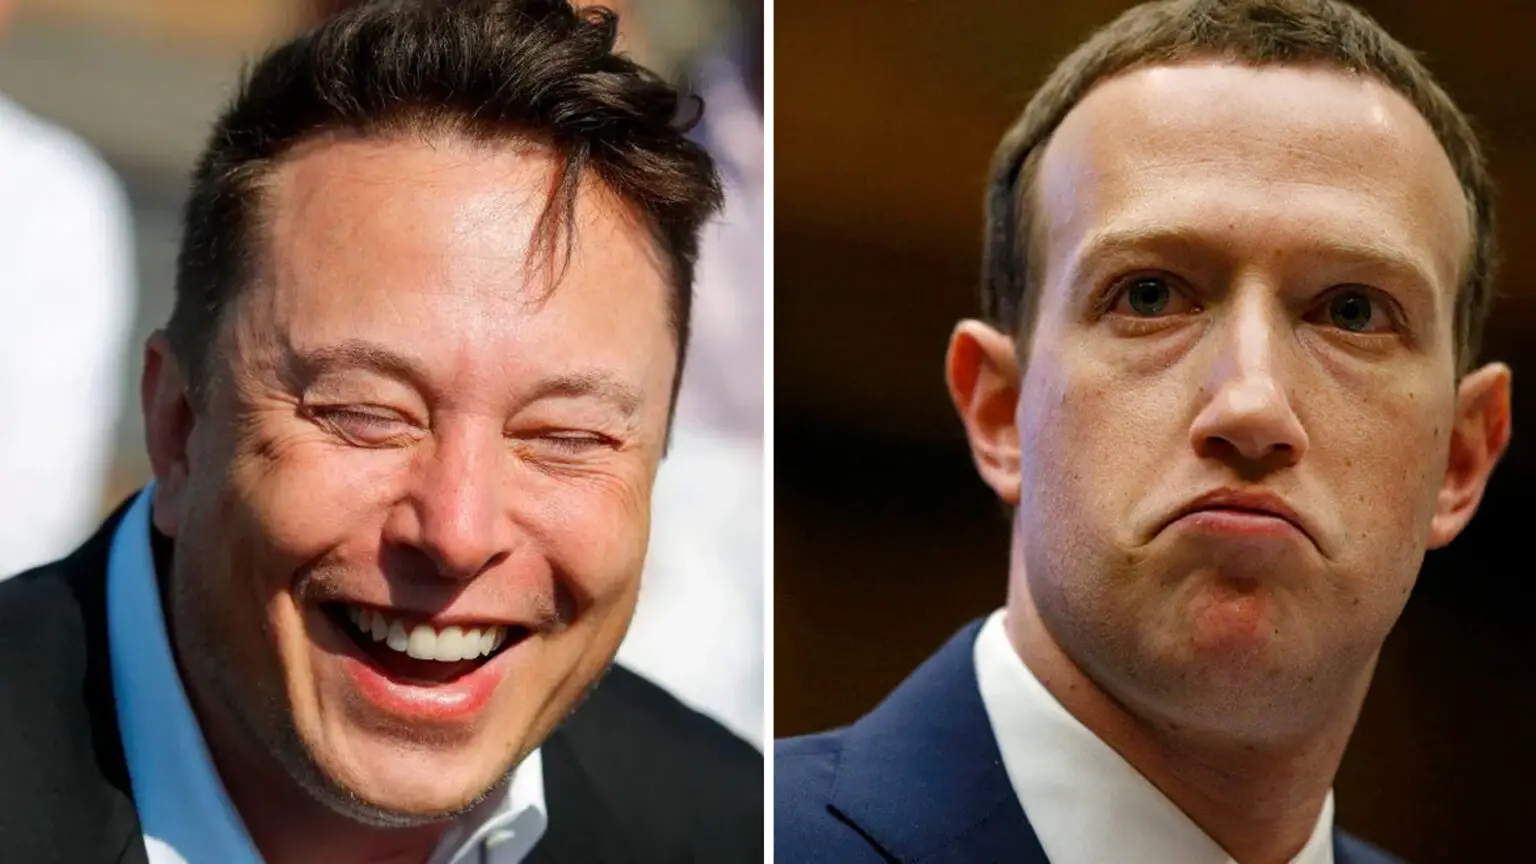 Elon Musk blasts Mark Zuckerberg with direct criticism said "WhatsApp 'can't be trusted"